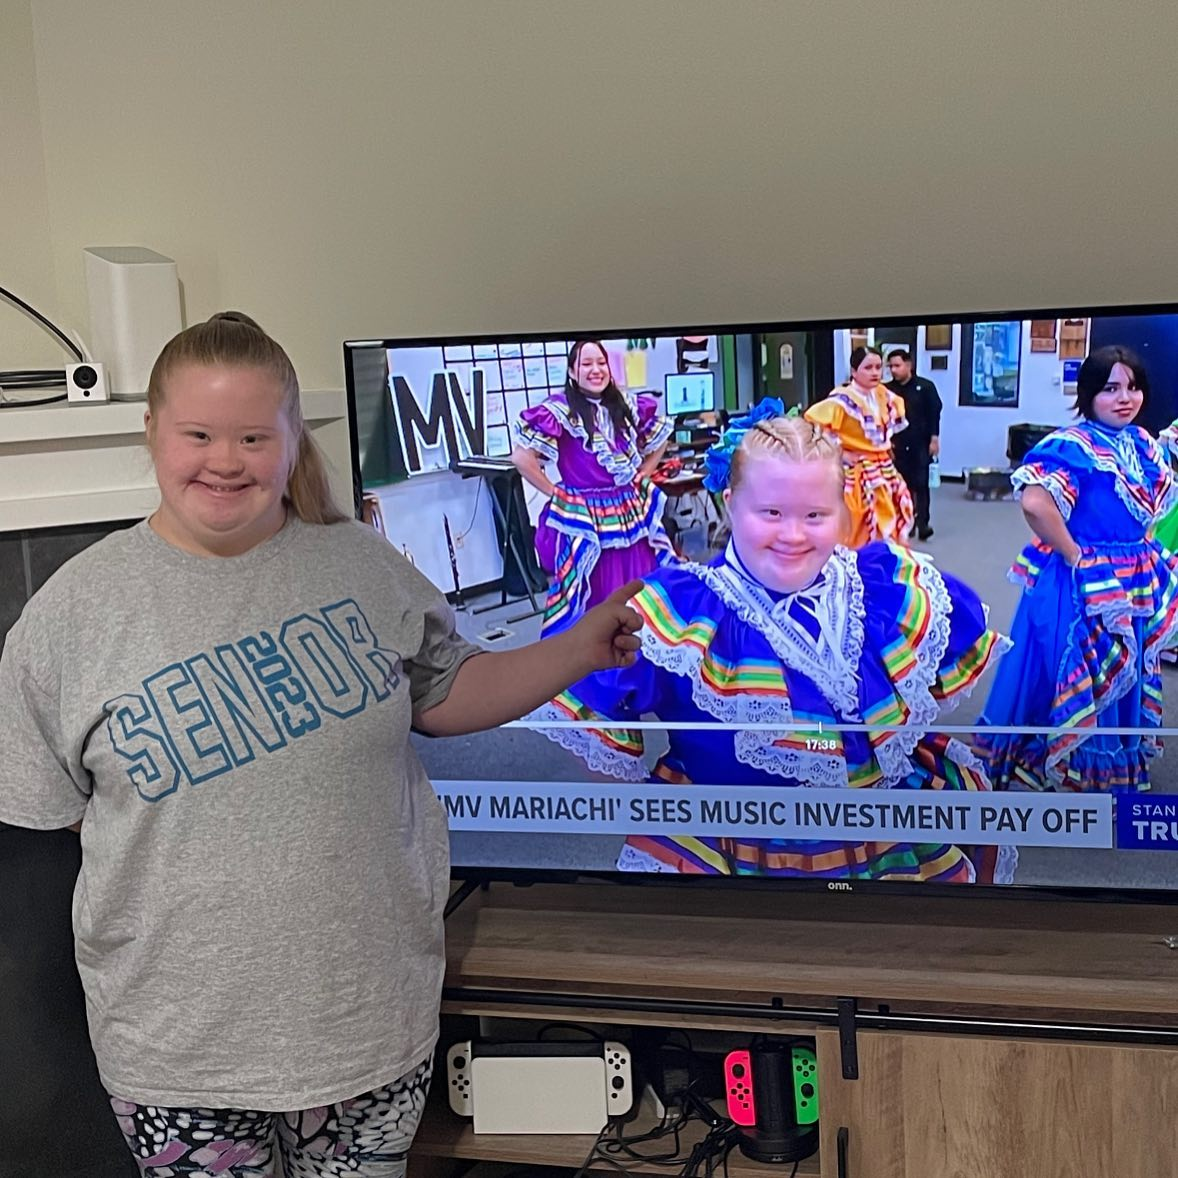 Student poses in front of TV